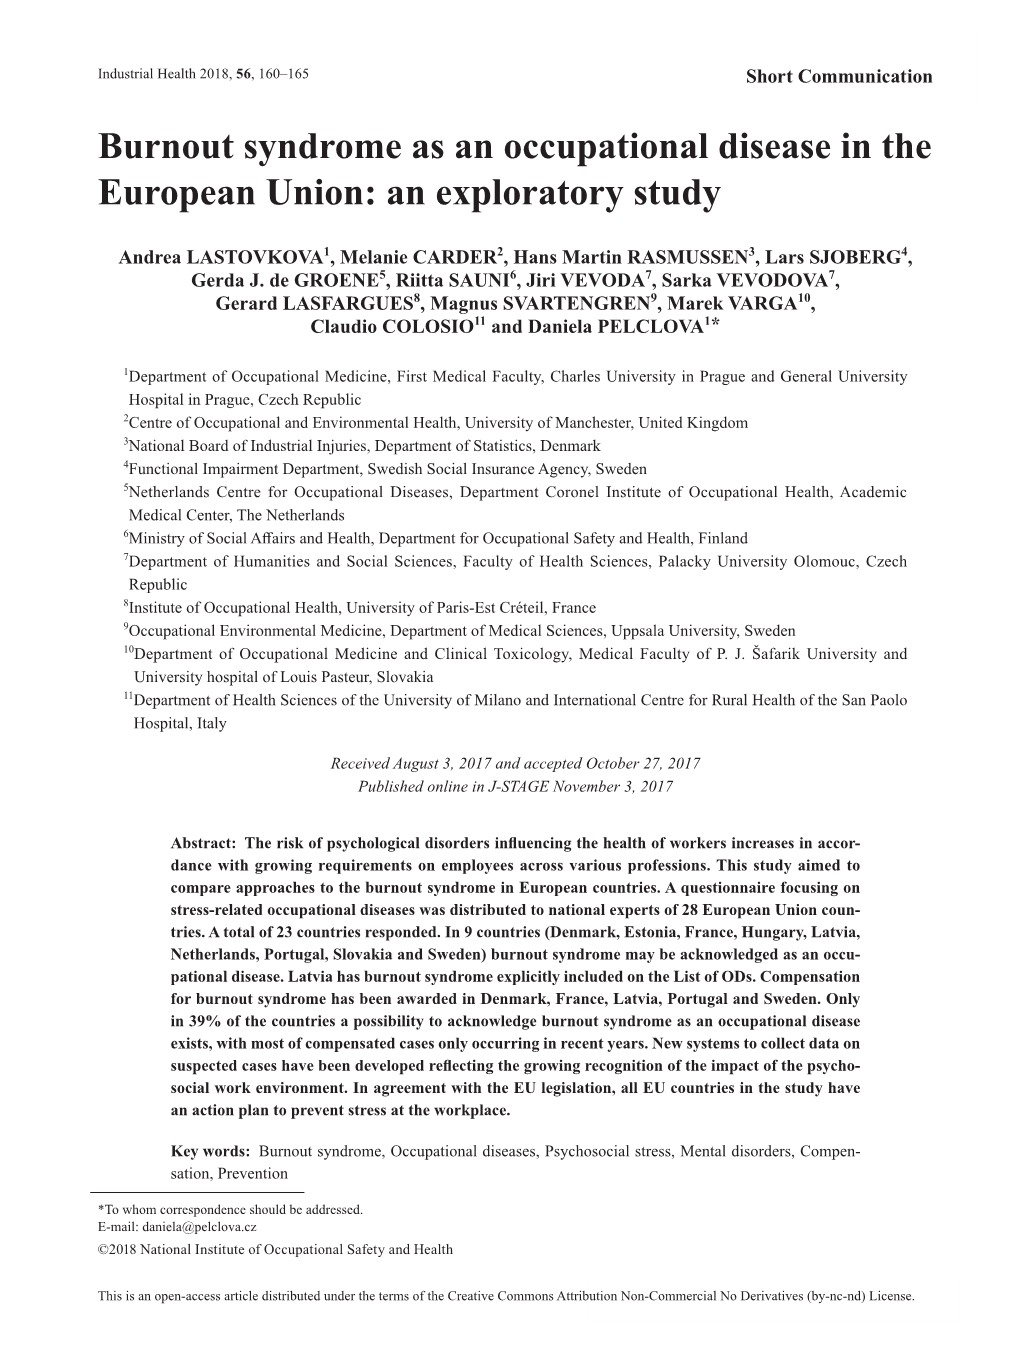 Burnout Syndrome As an Occupational Disease in the European Union: an Exploratory Study